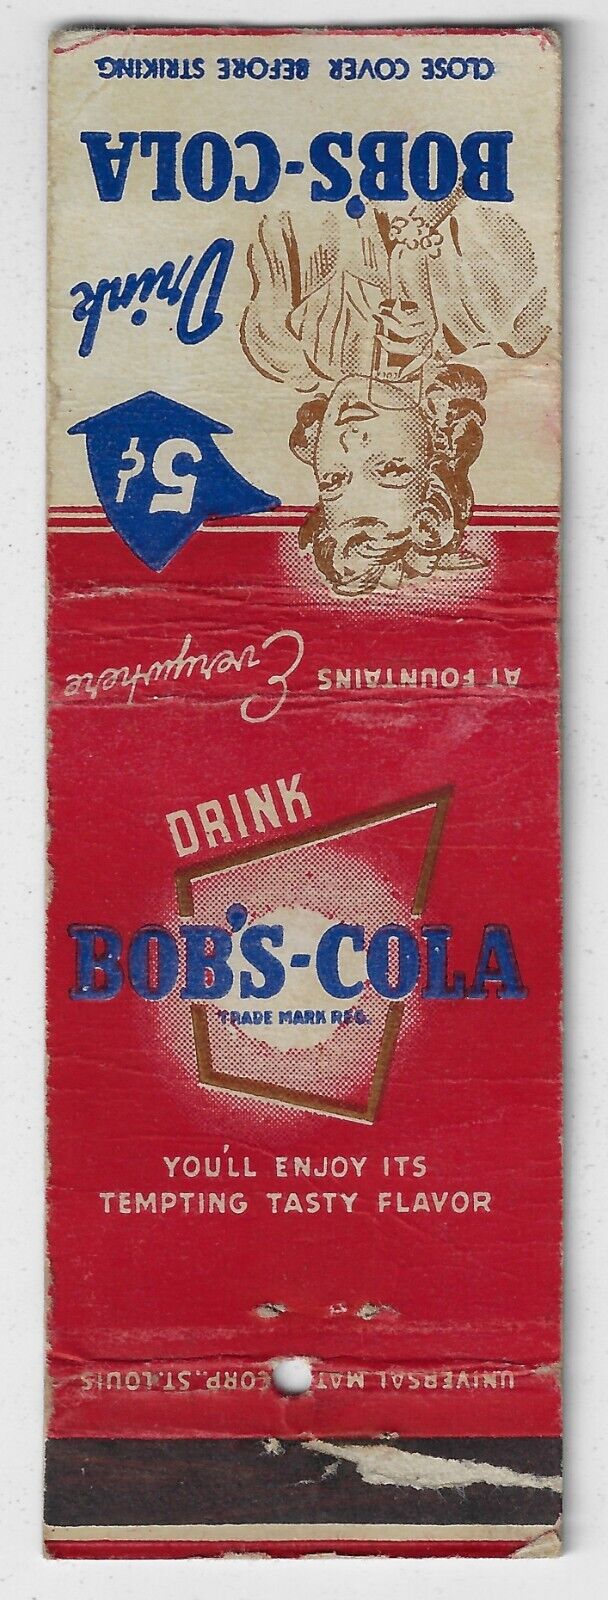 FS Empty Matchbook cover Drink Bob's Cola At fountains Damage